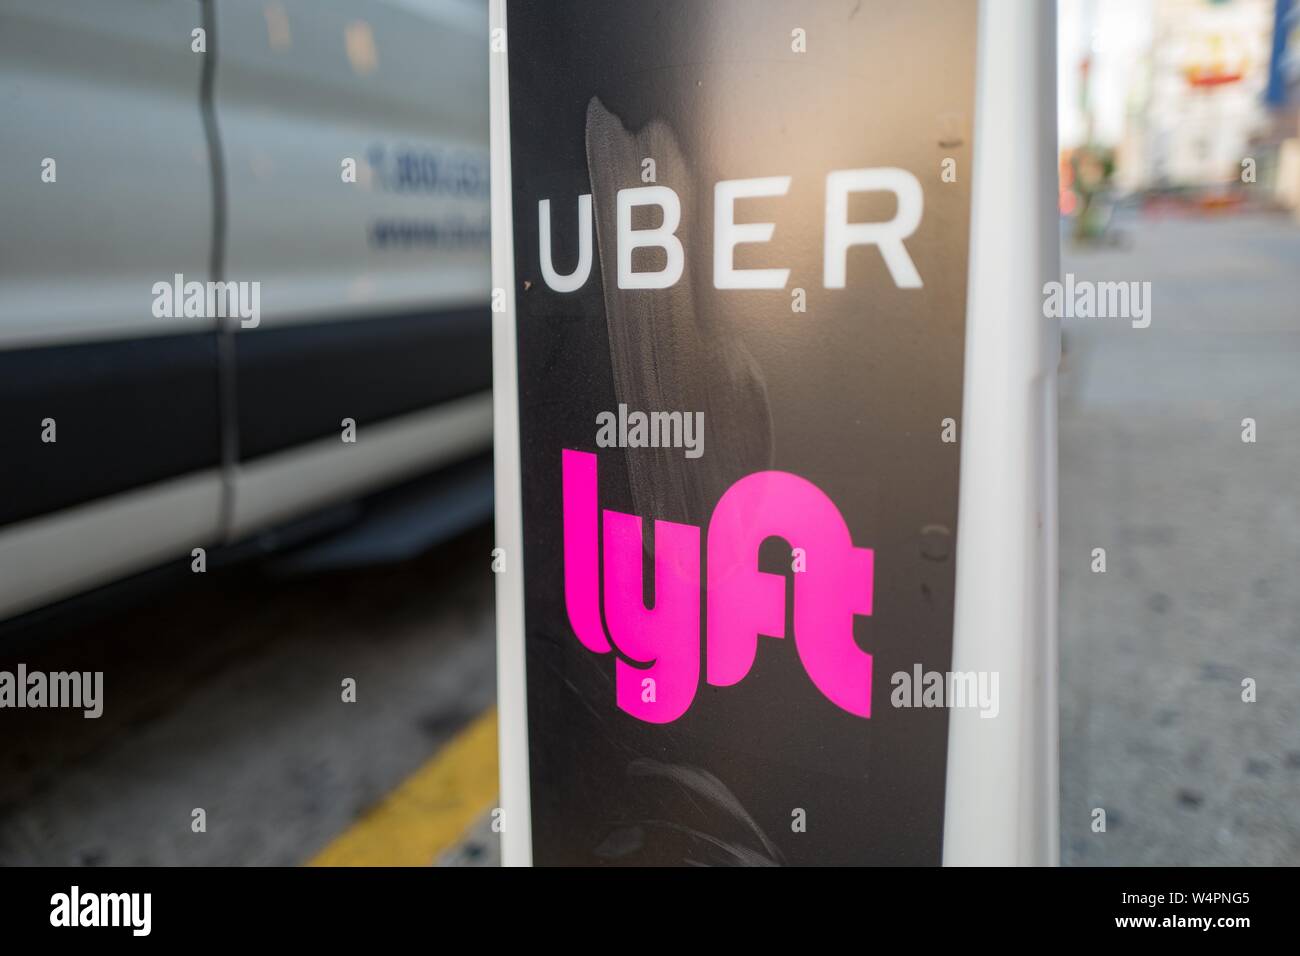 Close-up of vertical sign with logos for ridesharing companies Uber and Lyft, with wheels of a car in the background, indicating a location where rideshare pickups are available in downtown Los Angeles, California, October 24, 2018. () Stock Photo